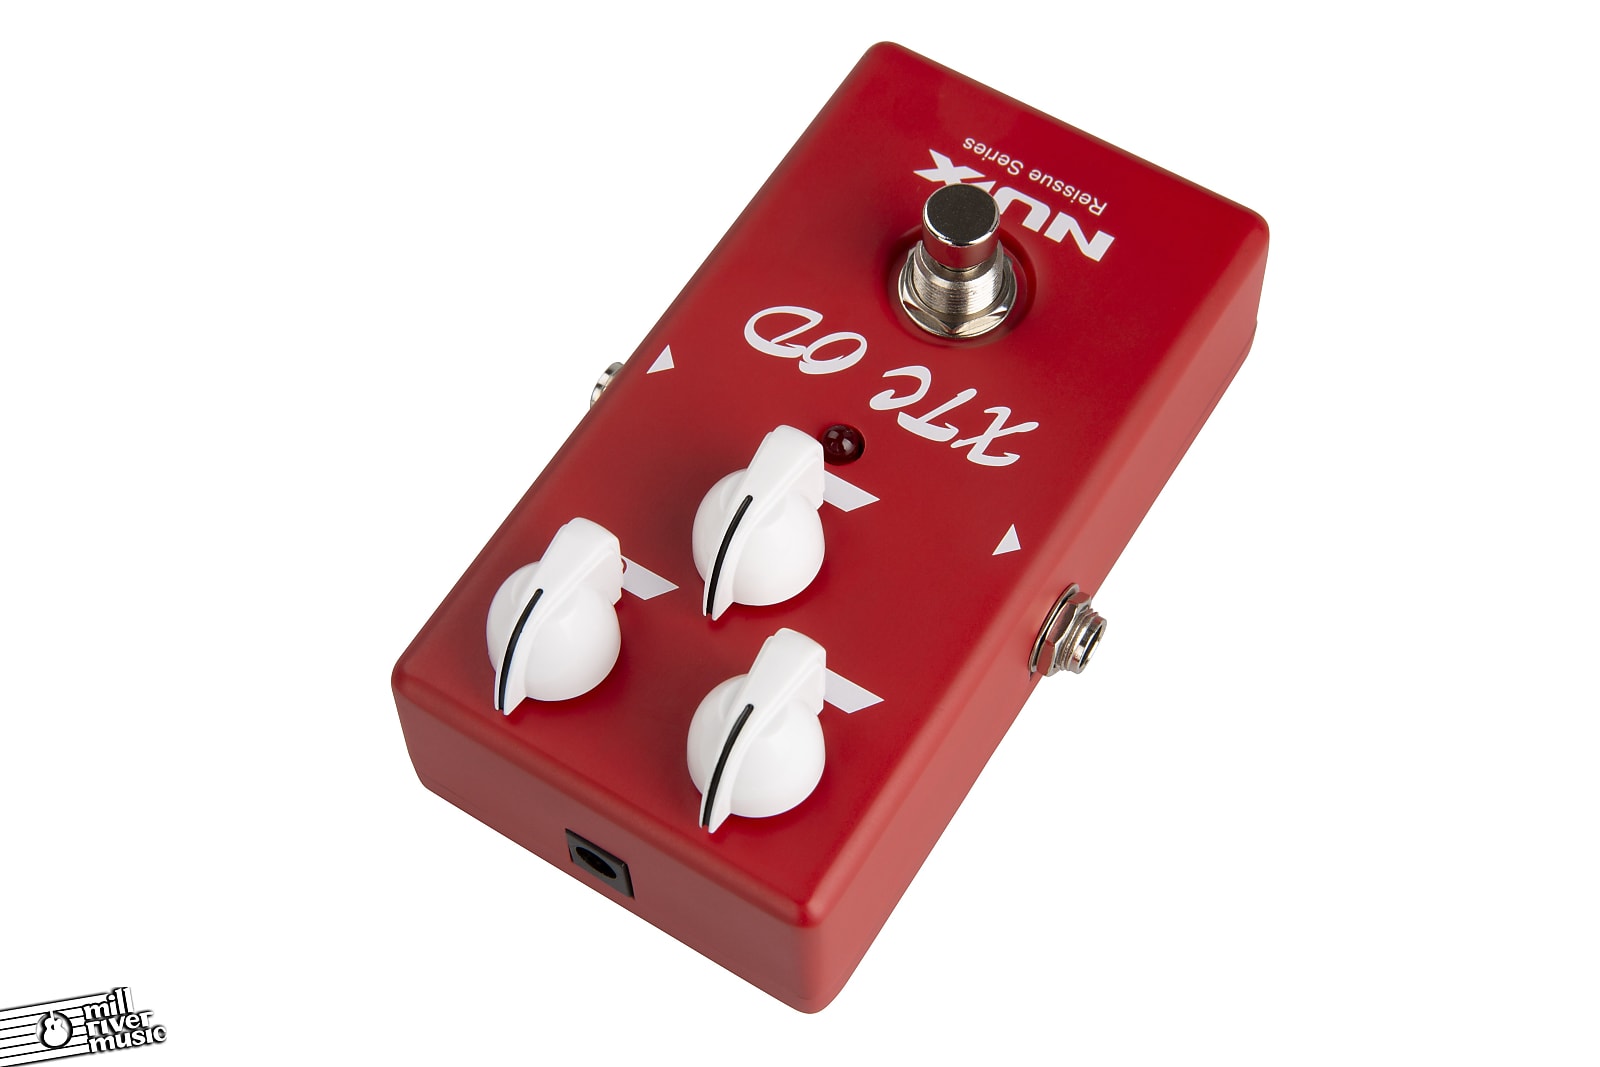 NuX Reissue Series XTC OD Overdrive Effects Pedal